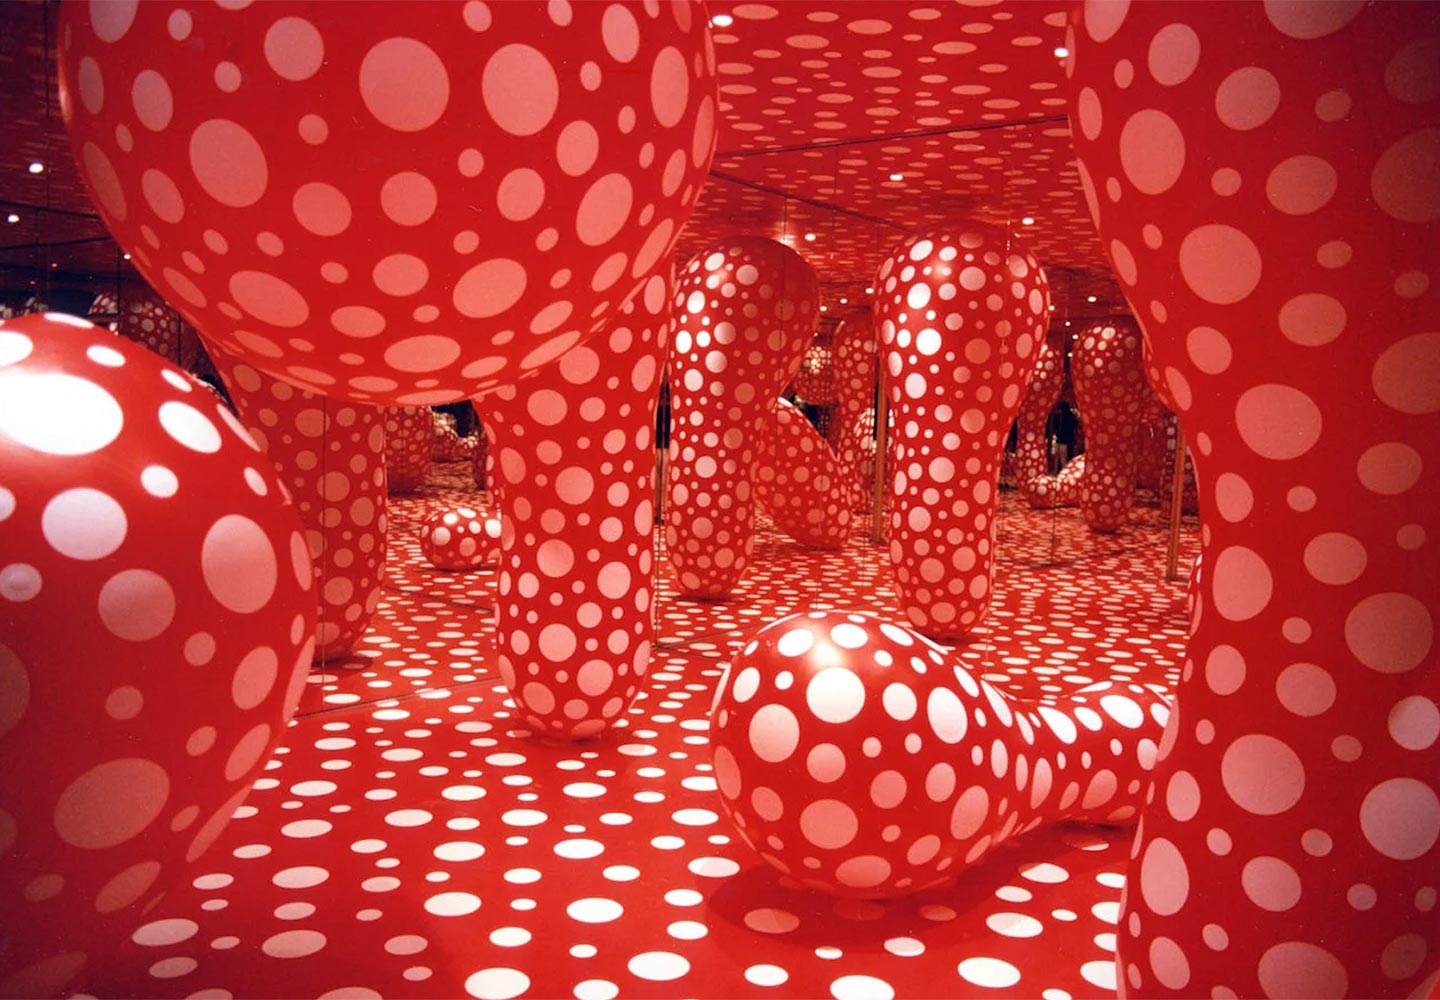 Yayoi Kusama, Dots Obsession, Infinity Mirrored Room, 1998. Installation. Les Abattoirs, Toulouse, France